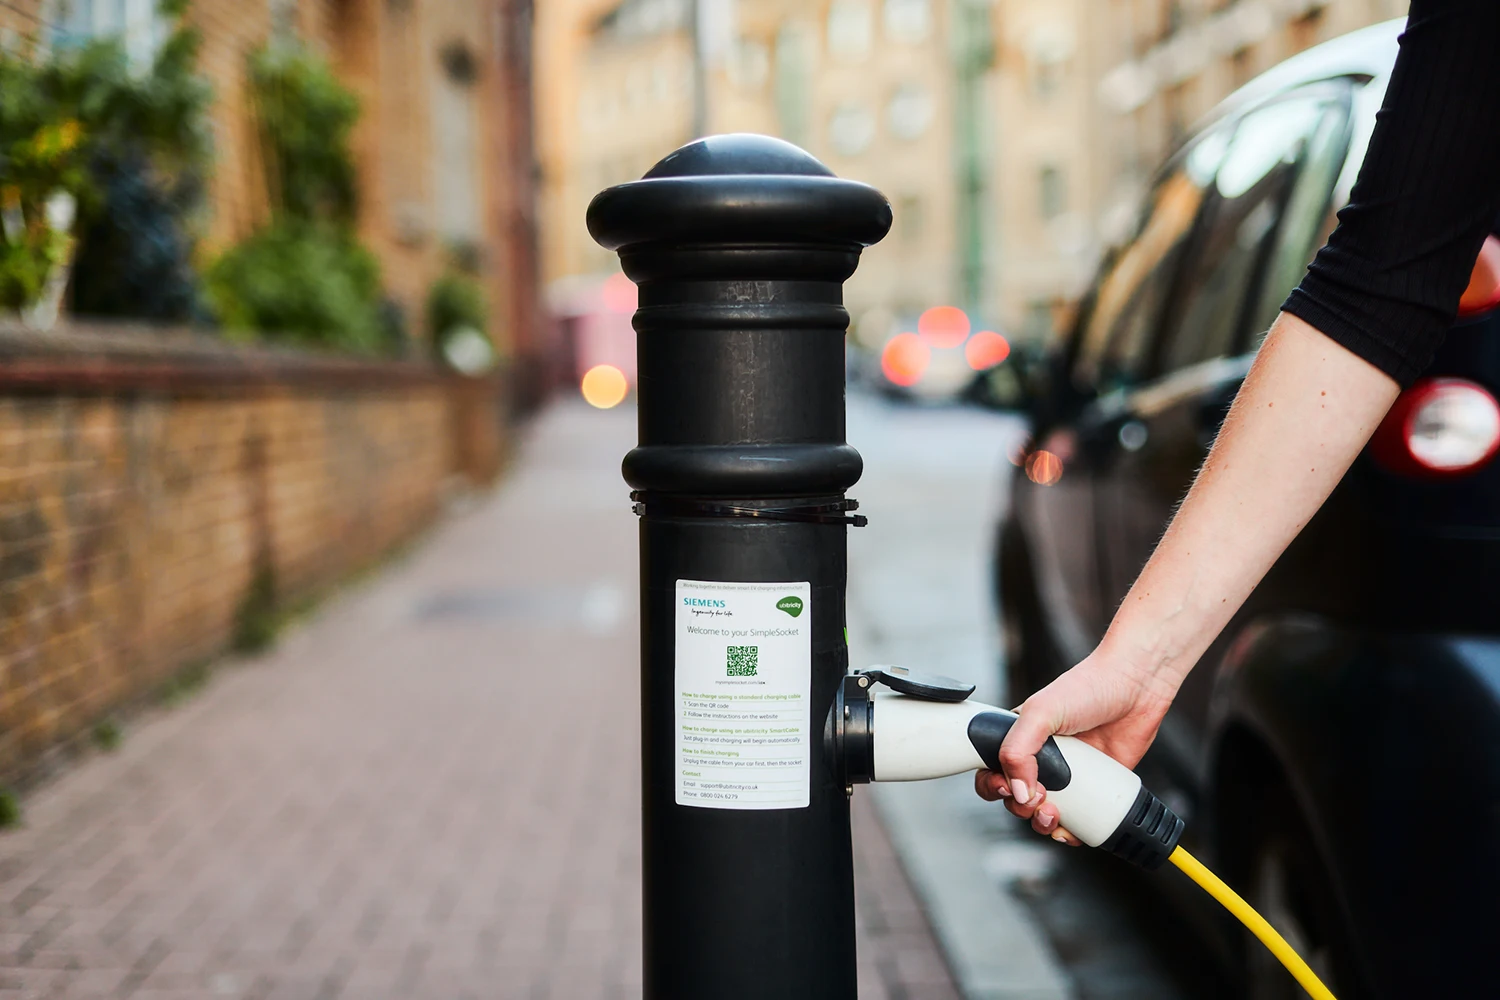 An EV driver is plugging in her electric car to an ubitricity EV bollard charge point in Tower Hamlets, London.